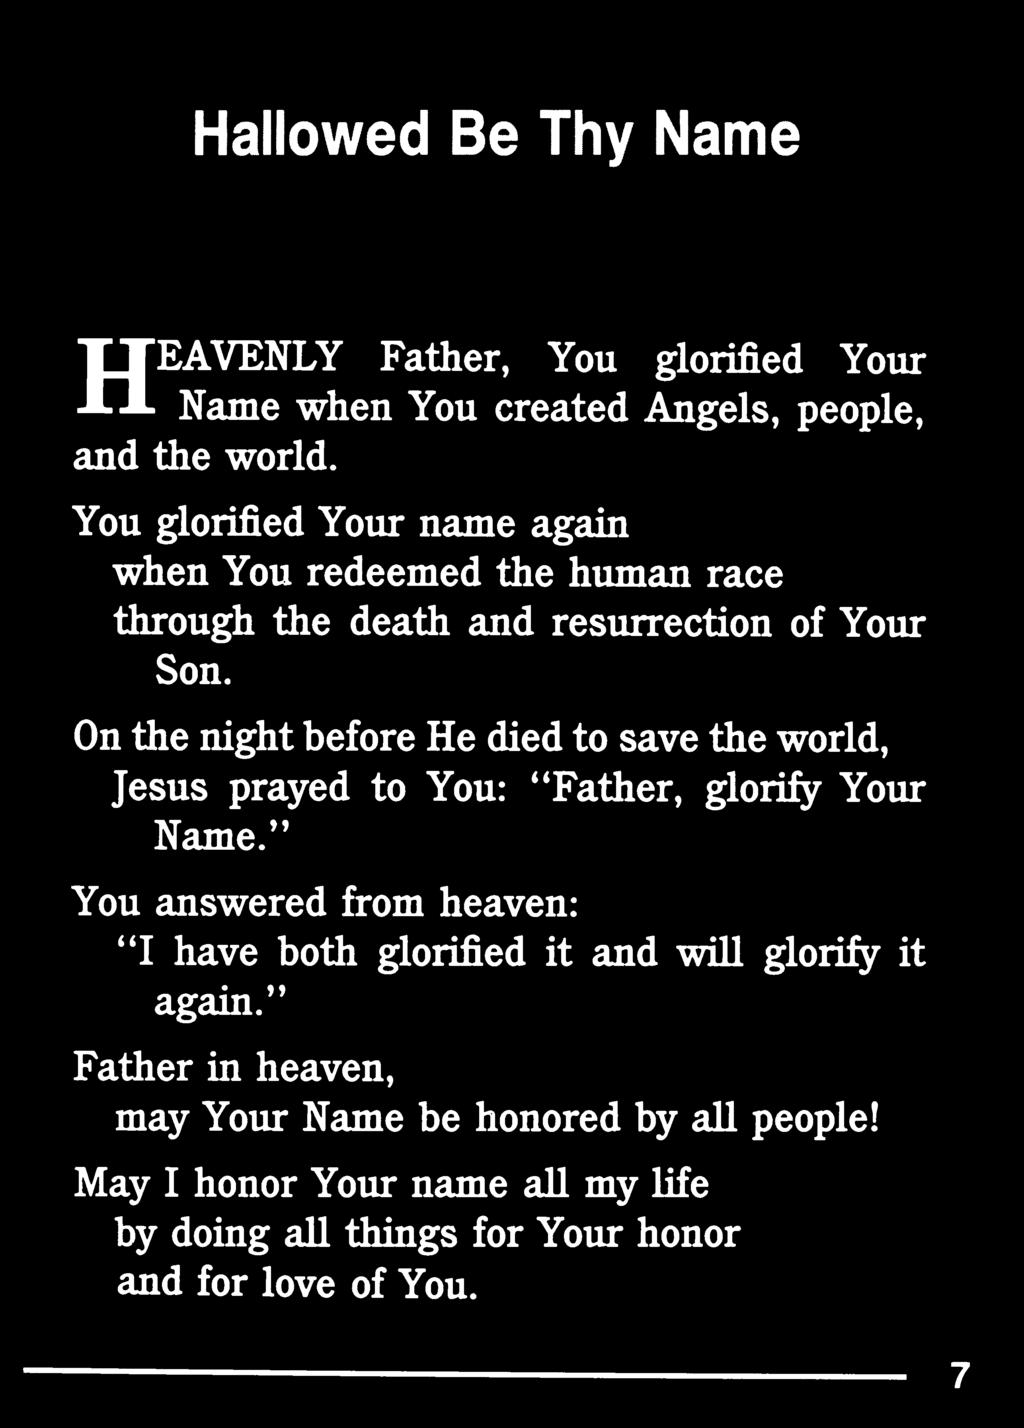 On the night before He died to save the world, Jesus prayed to You: * 'Father, glorify Your Name.